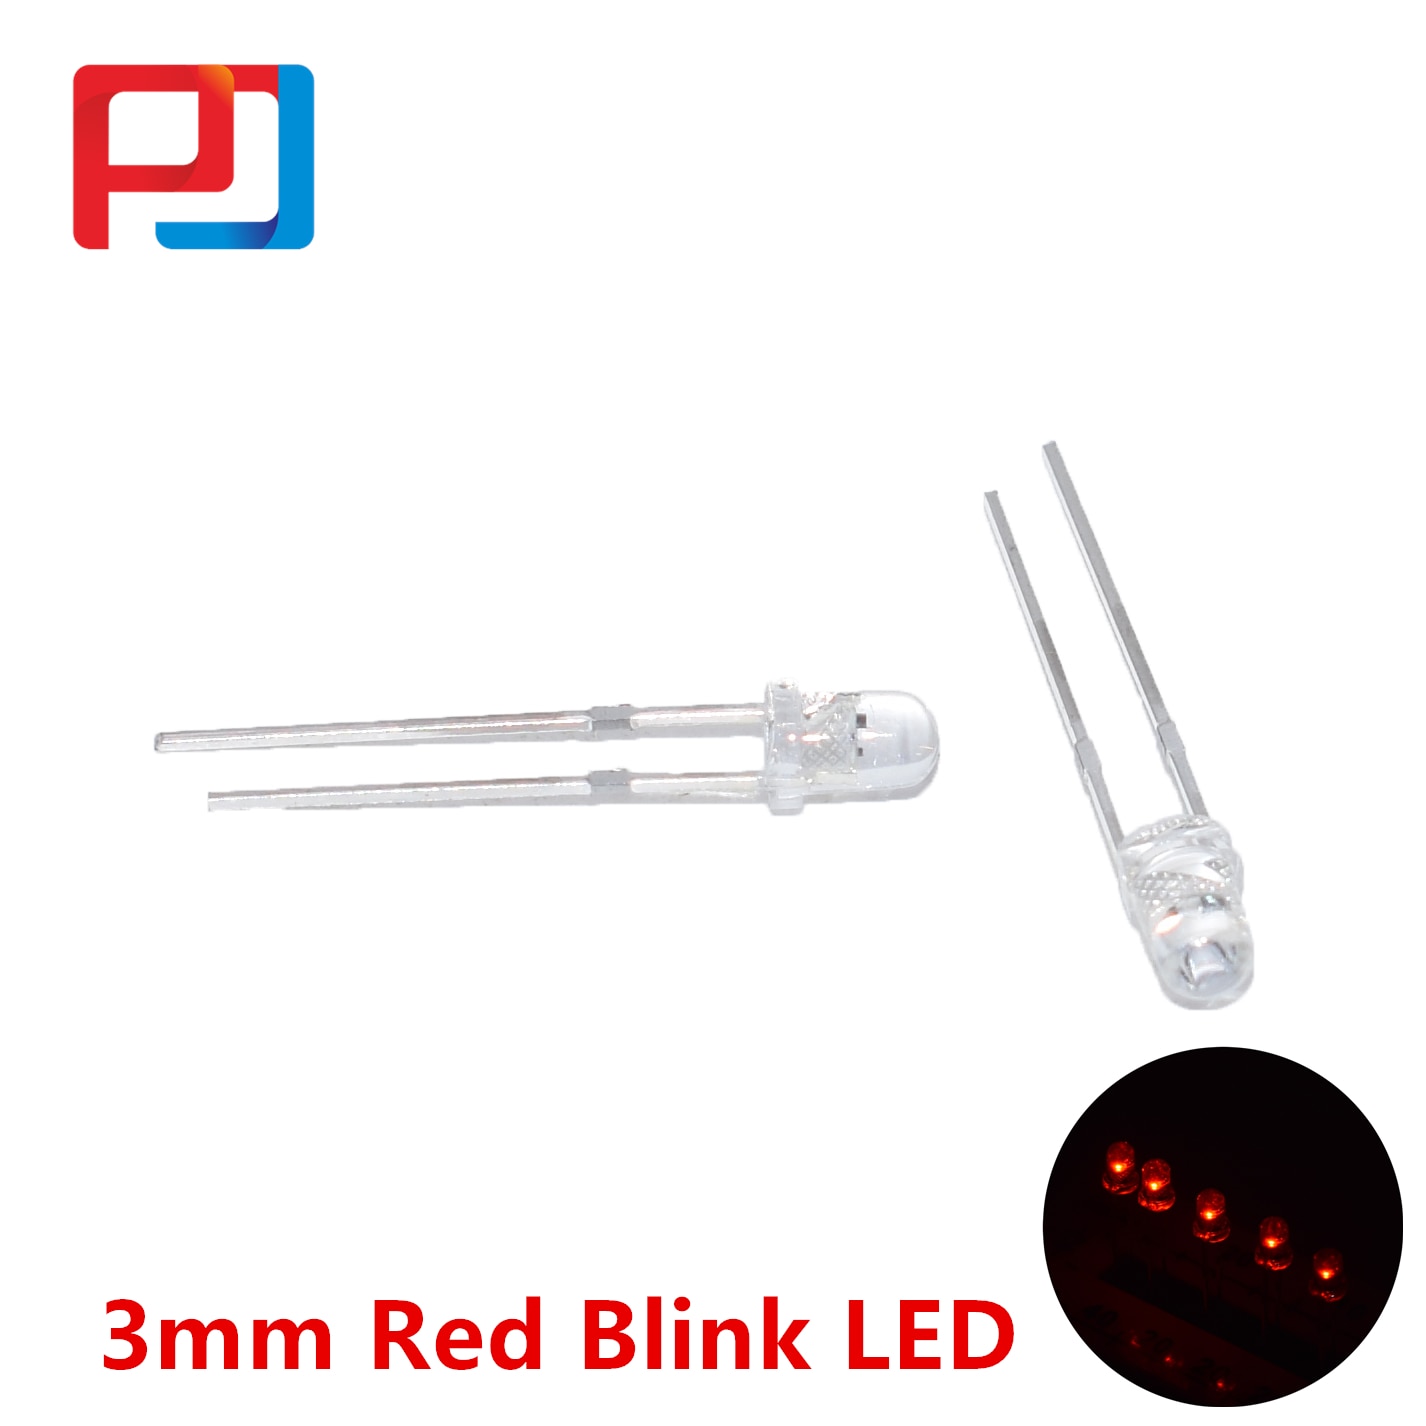 100Pcs 3 Mm Led Diodes Flash Flashing Rood Knipperend 2-Pins Clear 3 Mm Intermitente Light Emitting Diodos f3 Danshan Rood